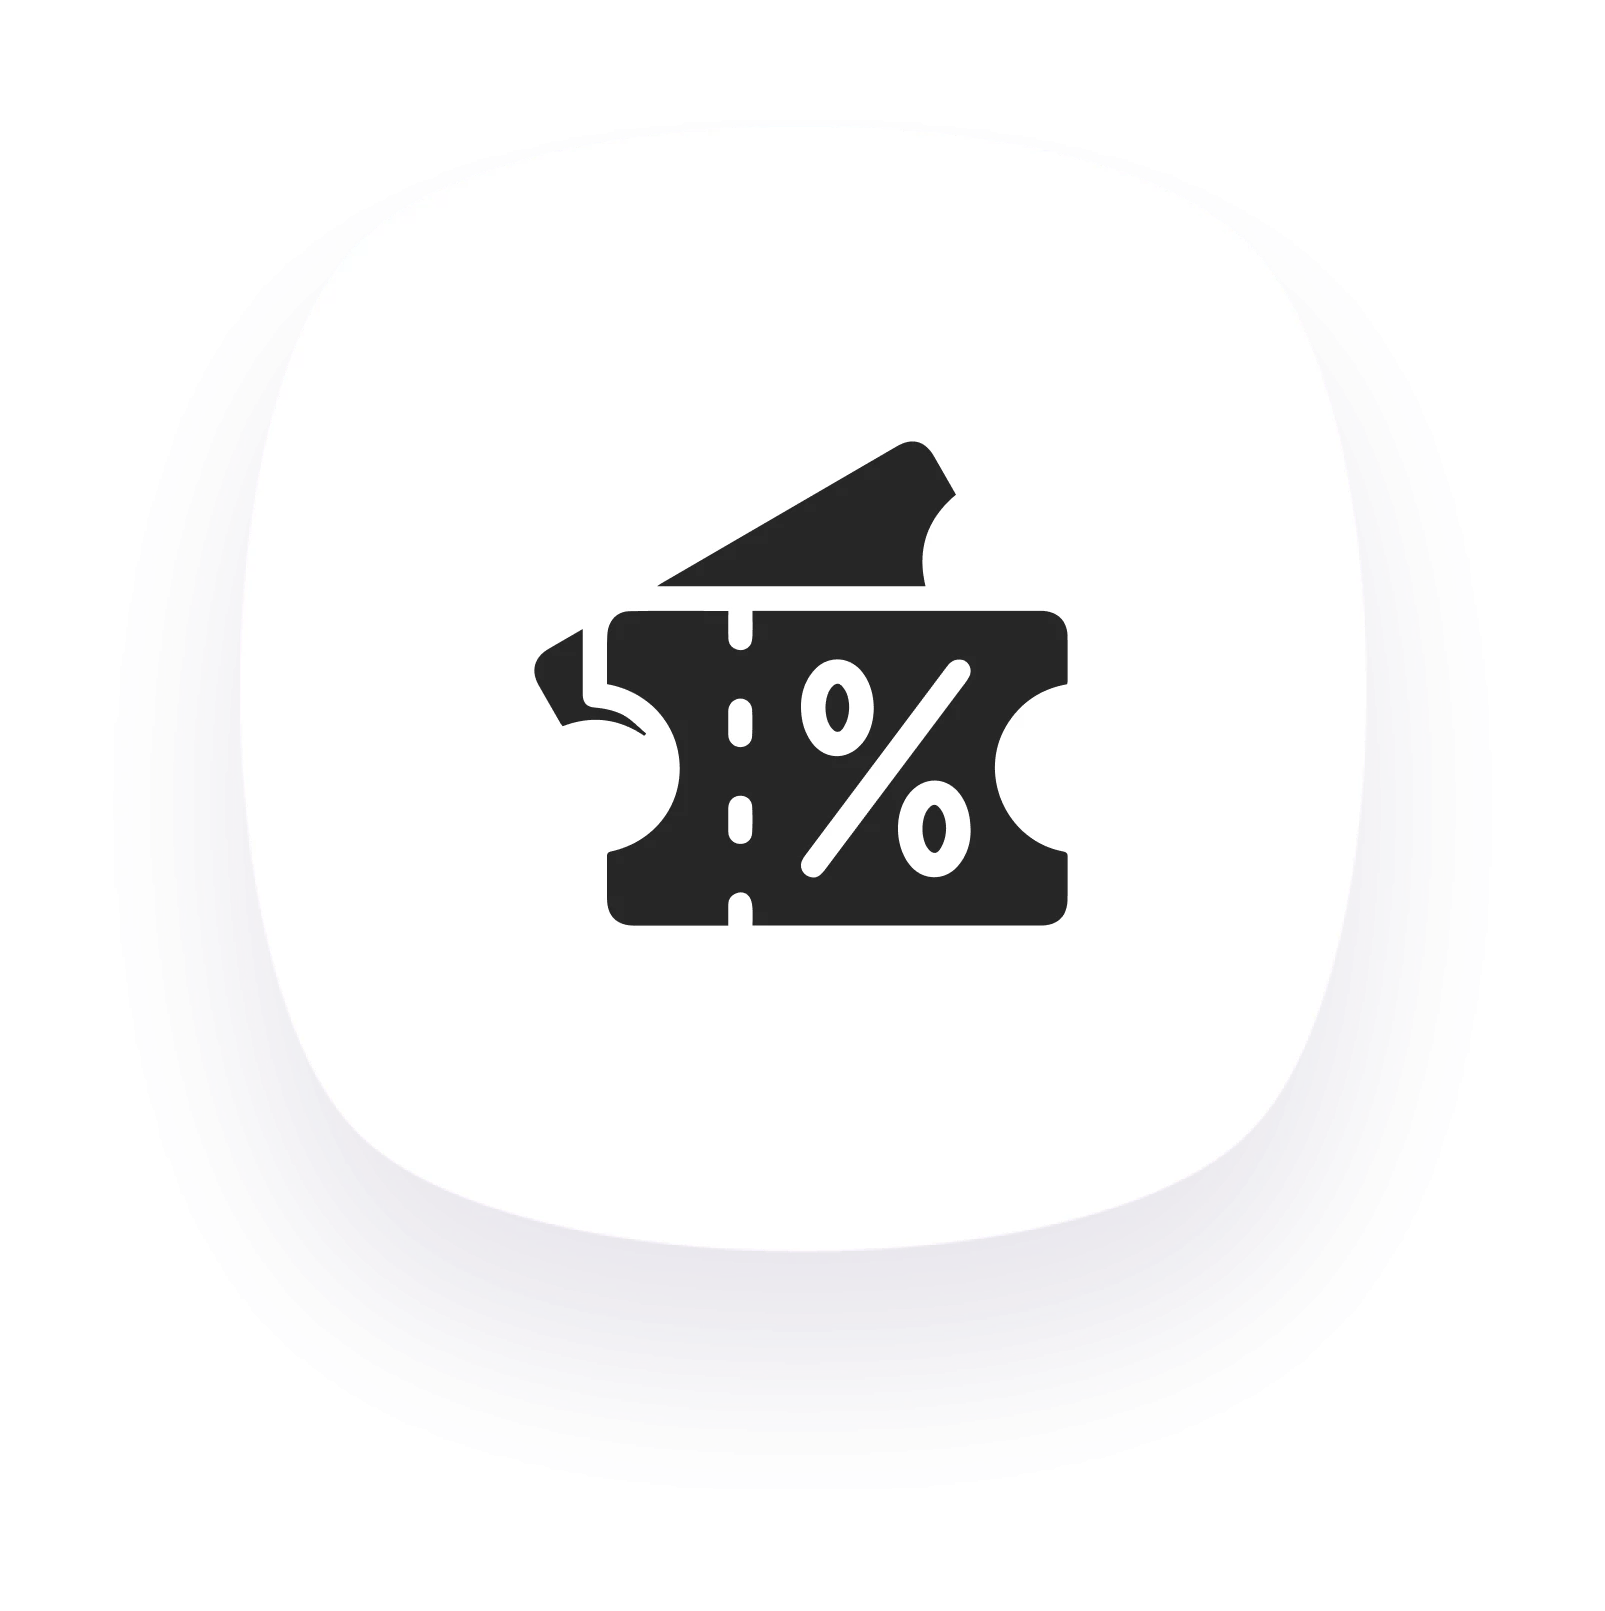 BetConstruct design and creation of bonuses and promos icon